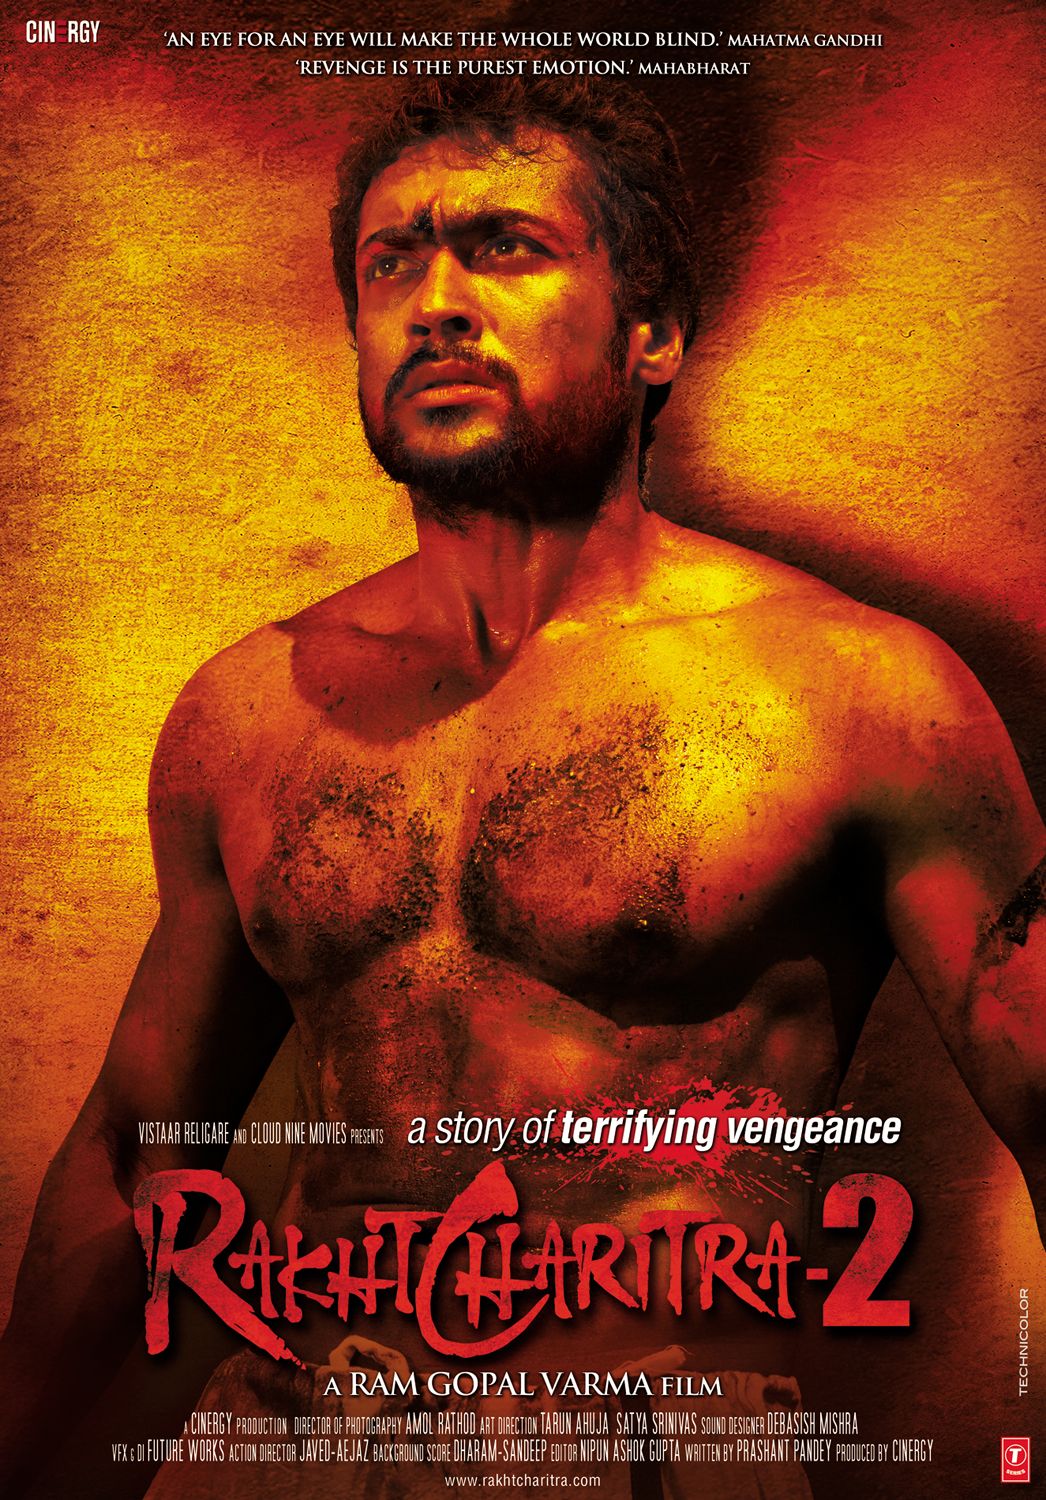 Extra Large Movie Poster Image for Rakta Charitra 2 (#2 of 2)